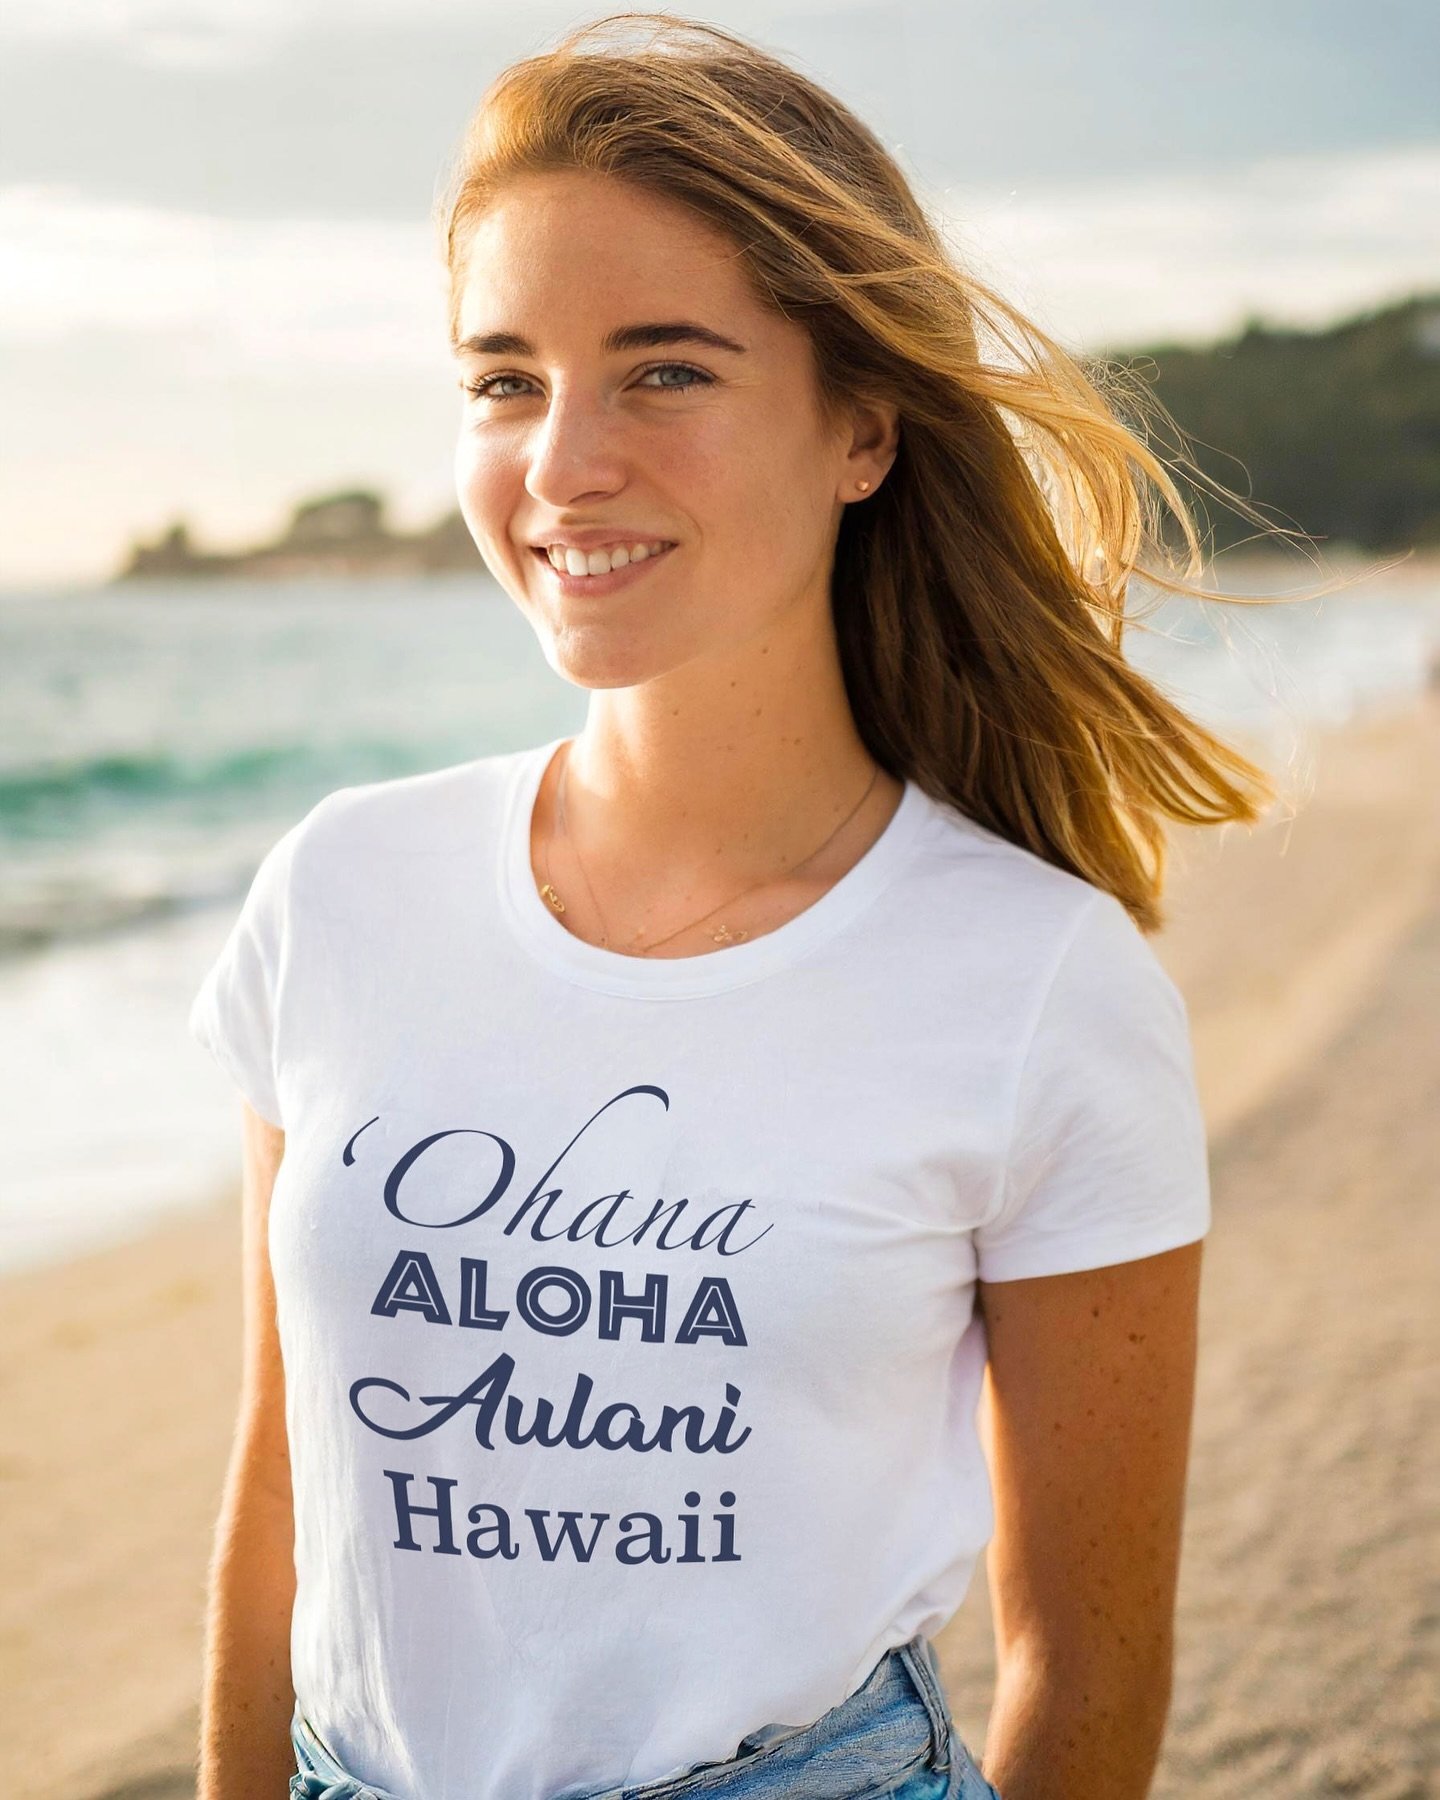 &lsquo;Ohana means family.
Aloha means hello (and goodbye).
Aulani means a message from the chief.
Hawaii means homeland.

It all means magic to us.

Unisex t-shirt:
https://www.1923mainstreet.com/shop/p/ohana-aloha-unisex-t-shirt

Browse more clothi